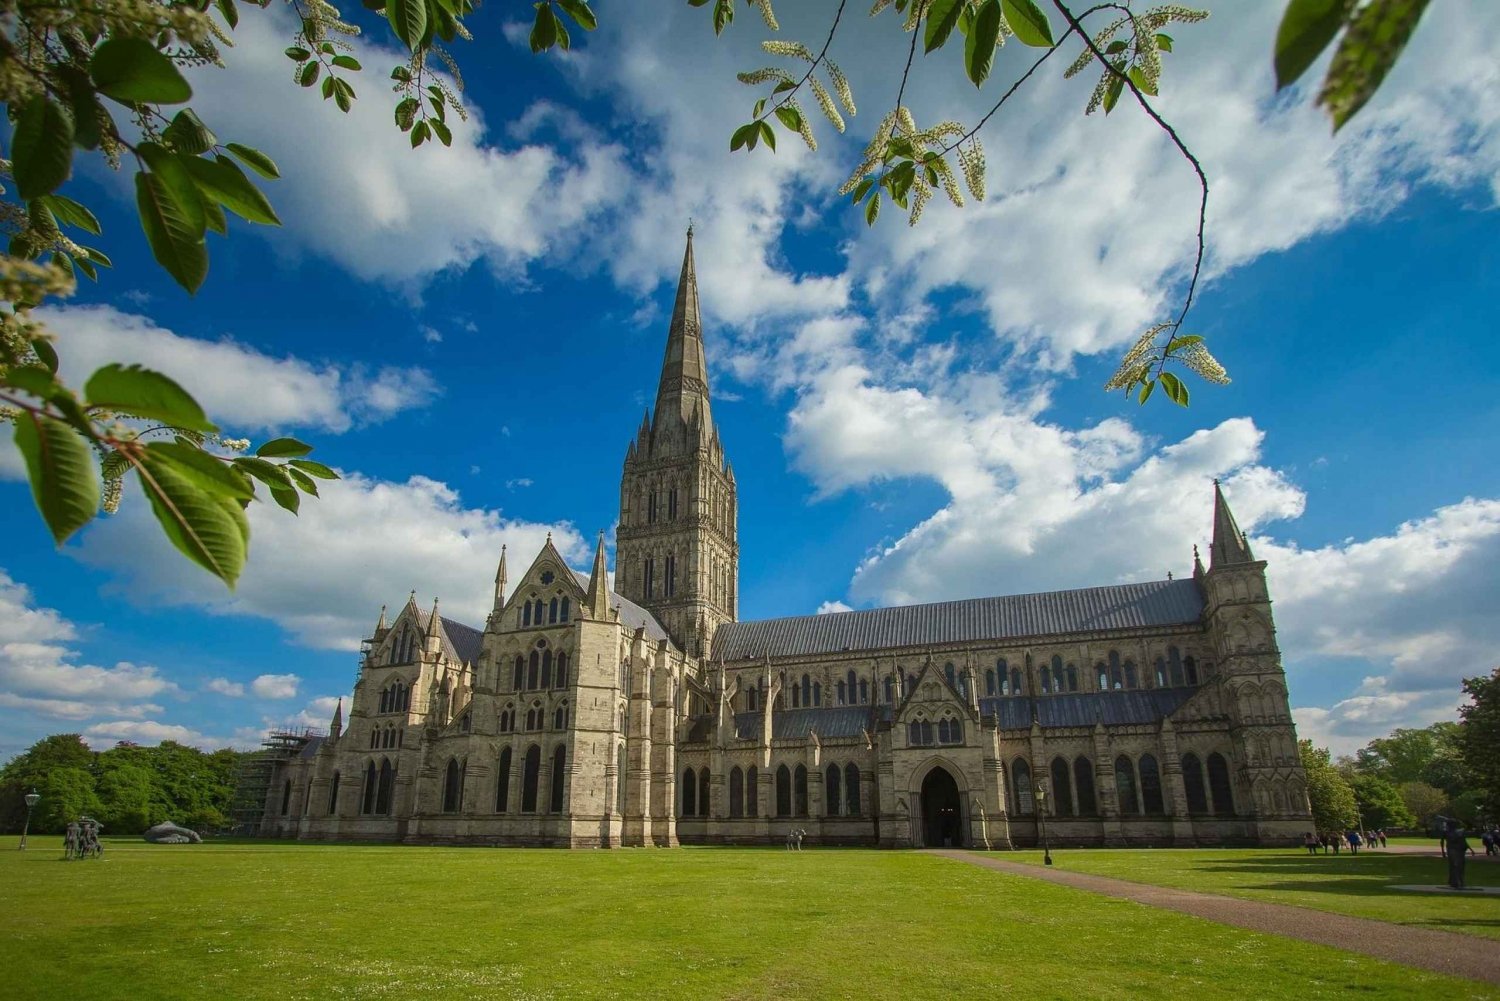 Salisbury, Stonehenge and Oxford Tour from London